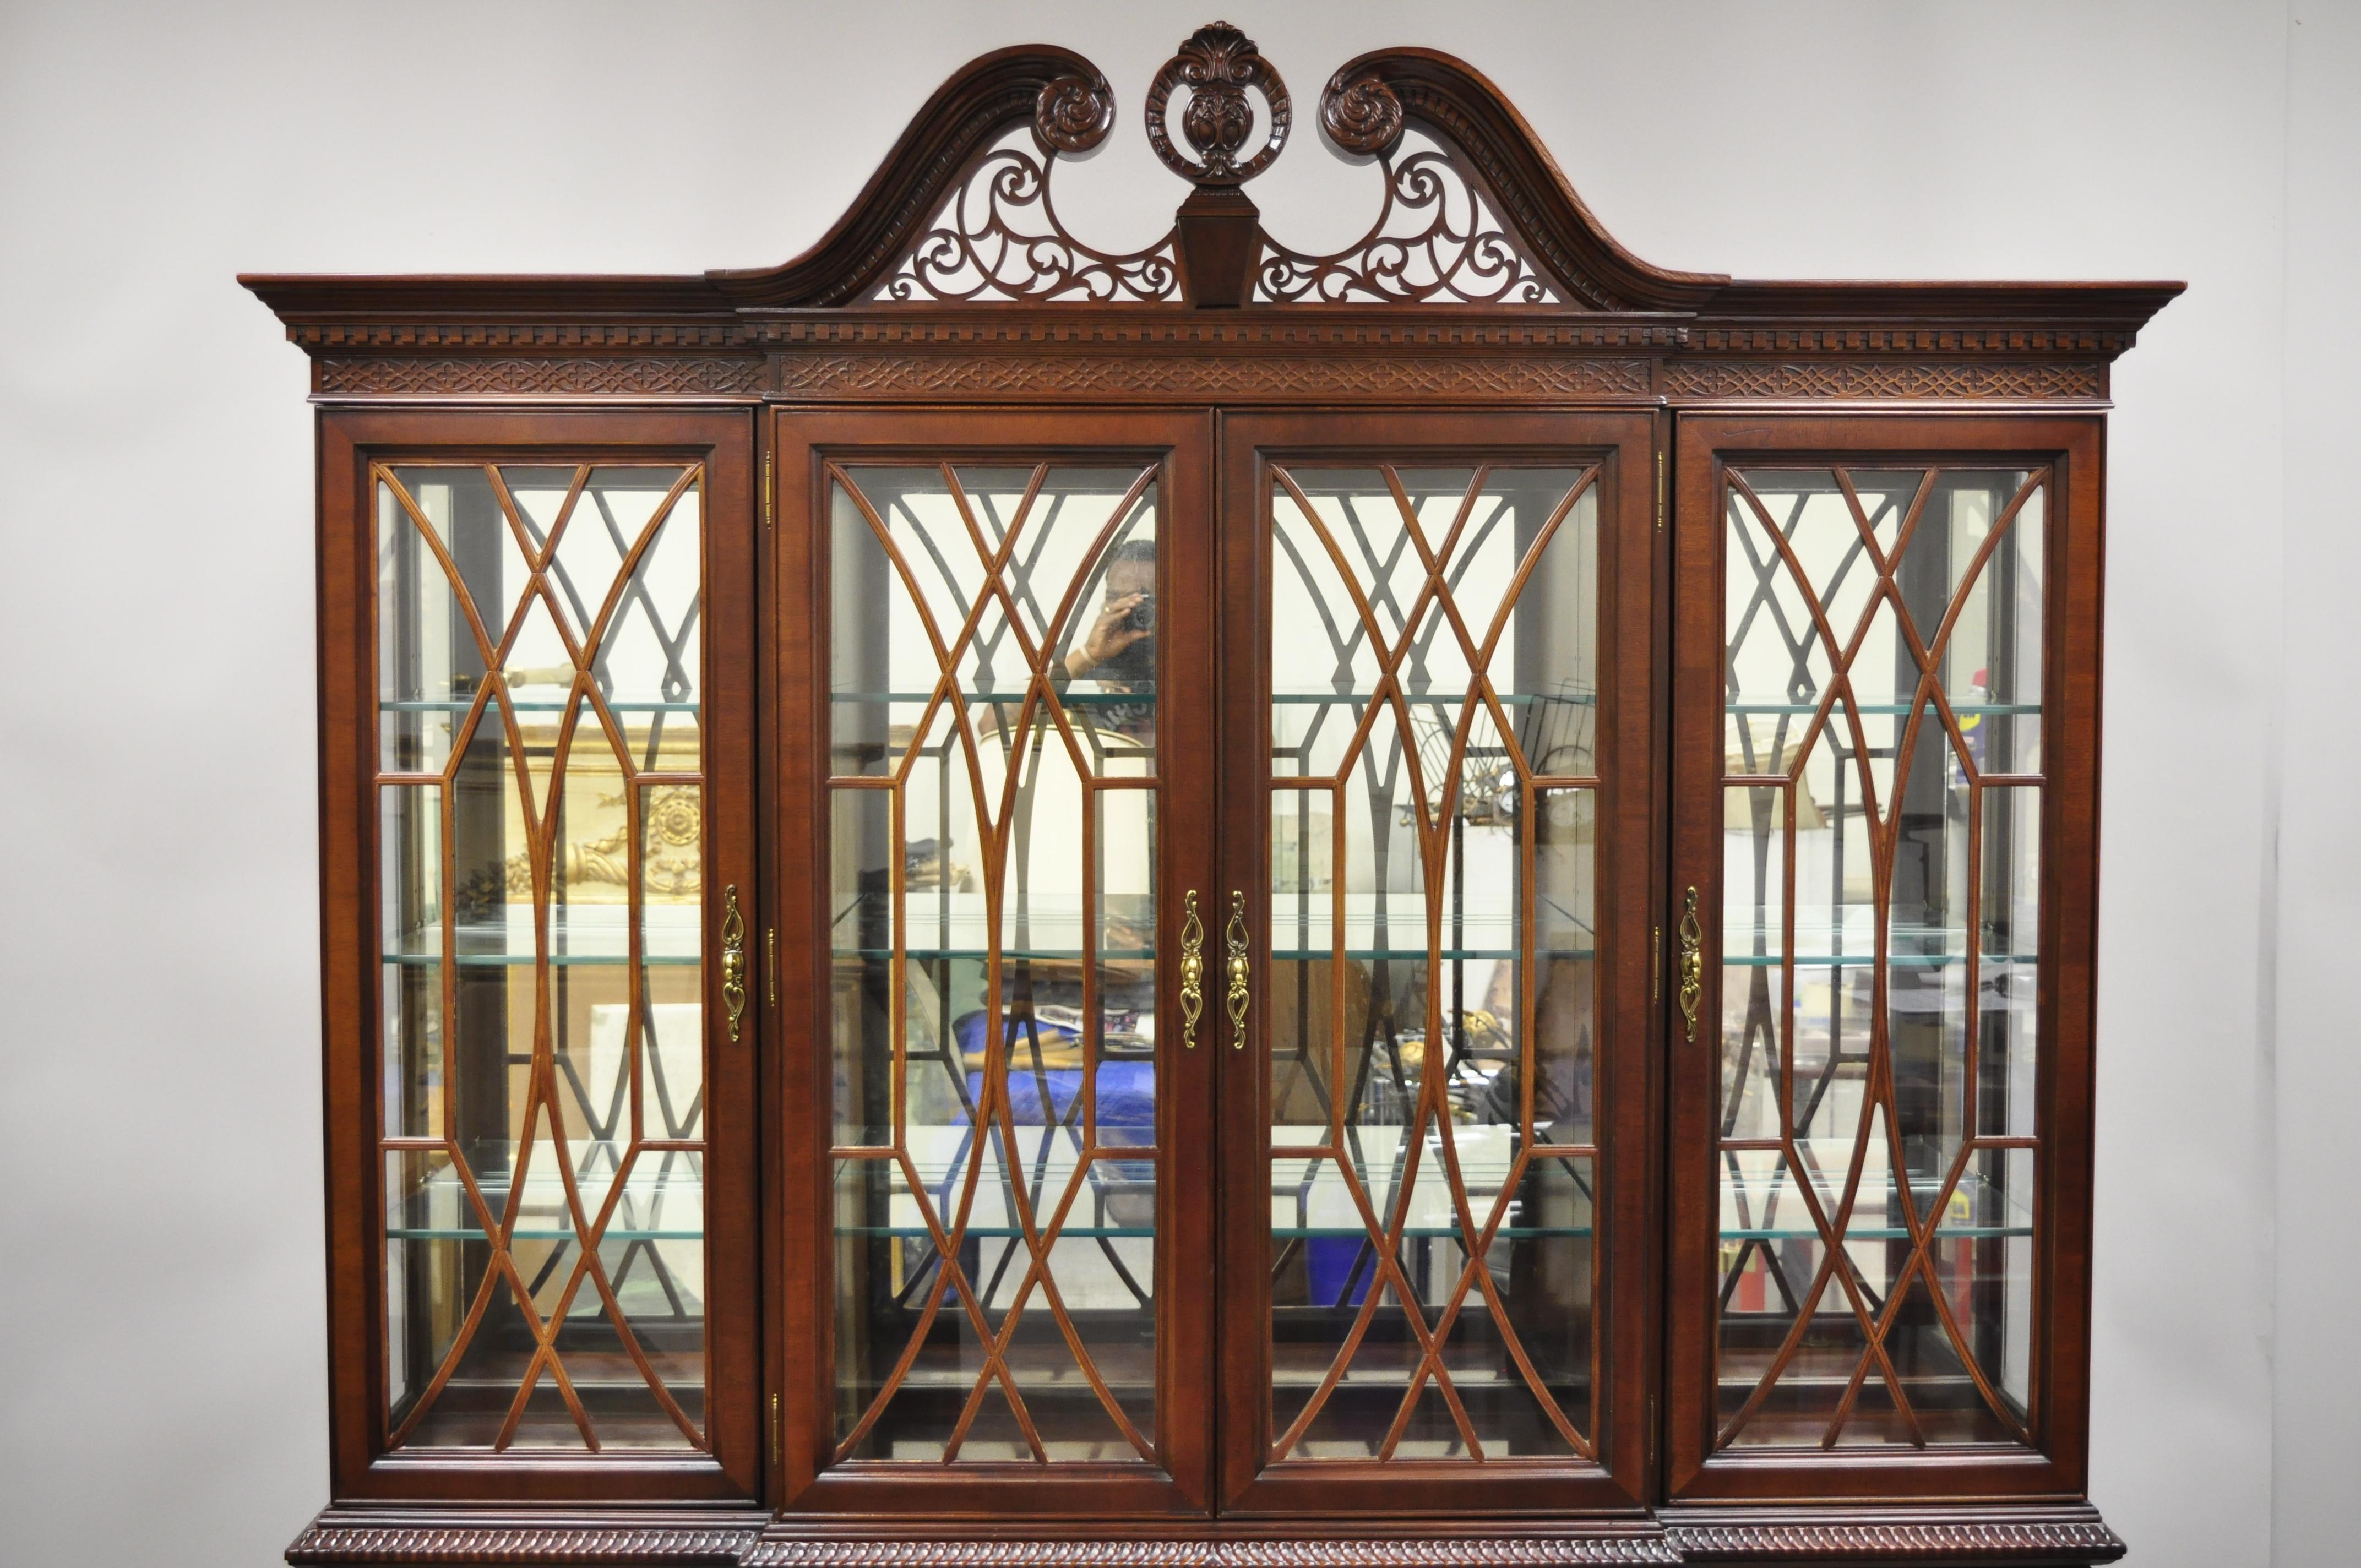 The Centennial collection Bernhardt mahogany Chippendale style breakfront china cabinet. Listing includes a solid wood construction, beautiful wood grain, nicely carved details, 2-part construction, lighted interior, 8 swing doors, original label, 3